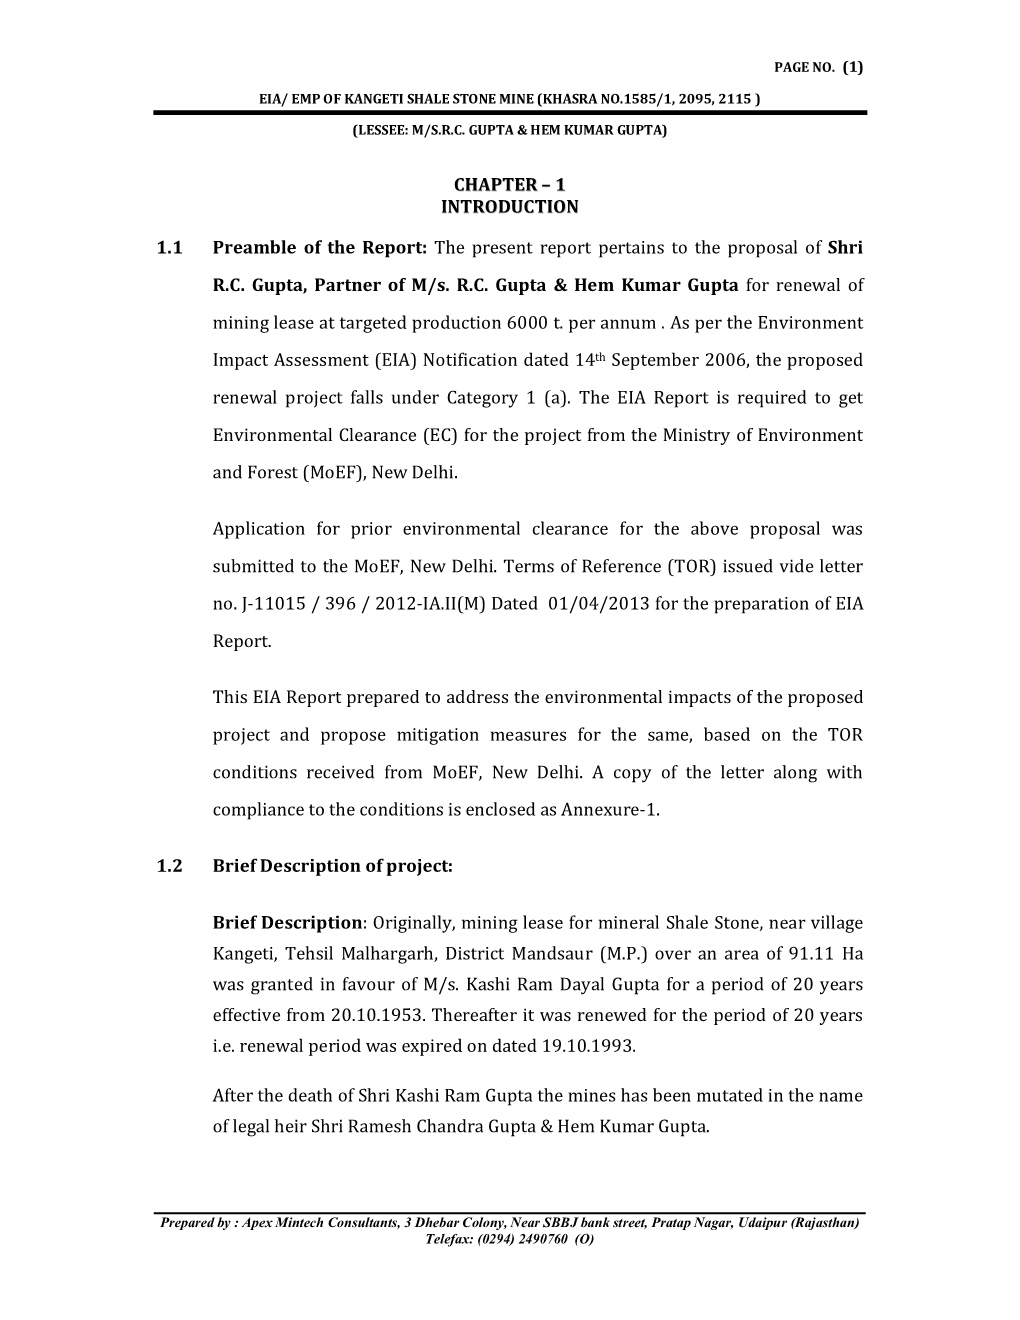 The Present Report Pertains to the Proposal of Shri RC Gupta, Partner O